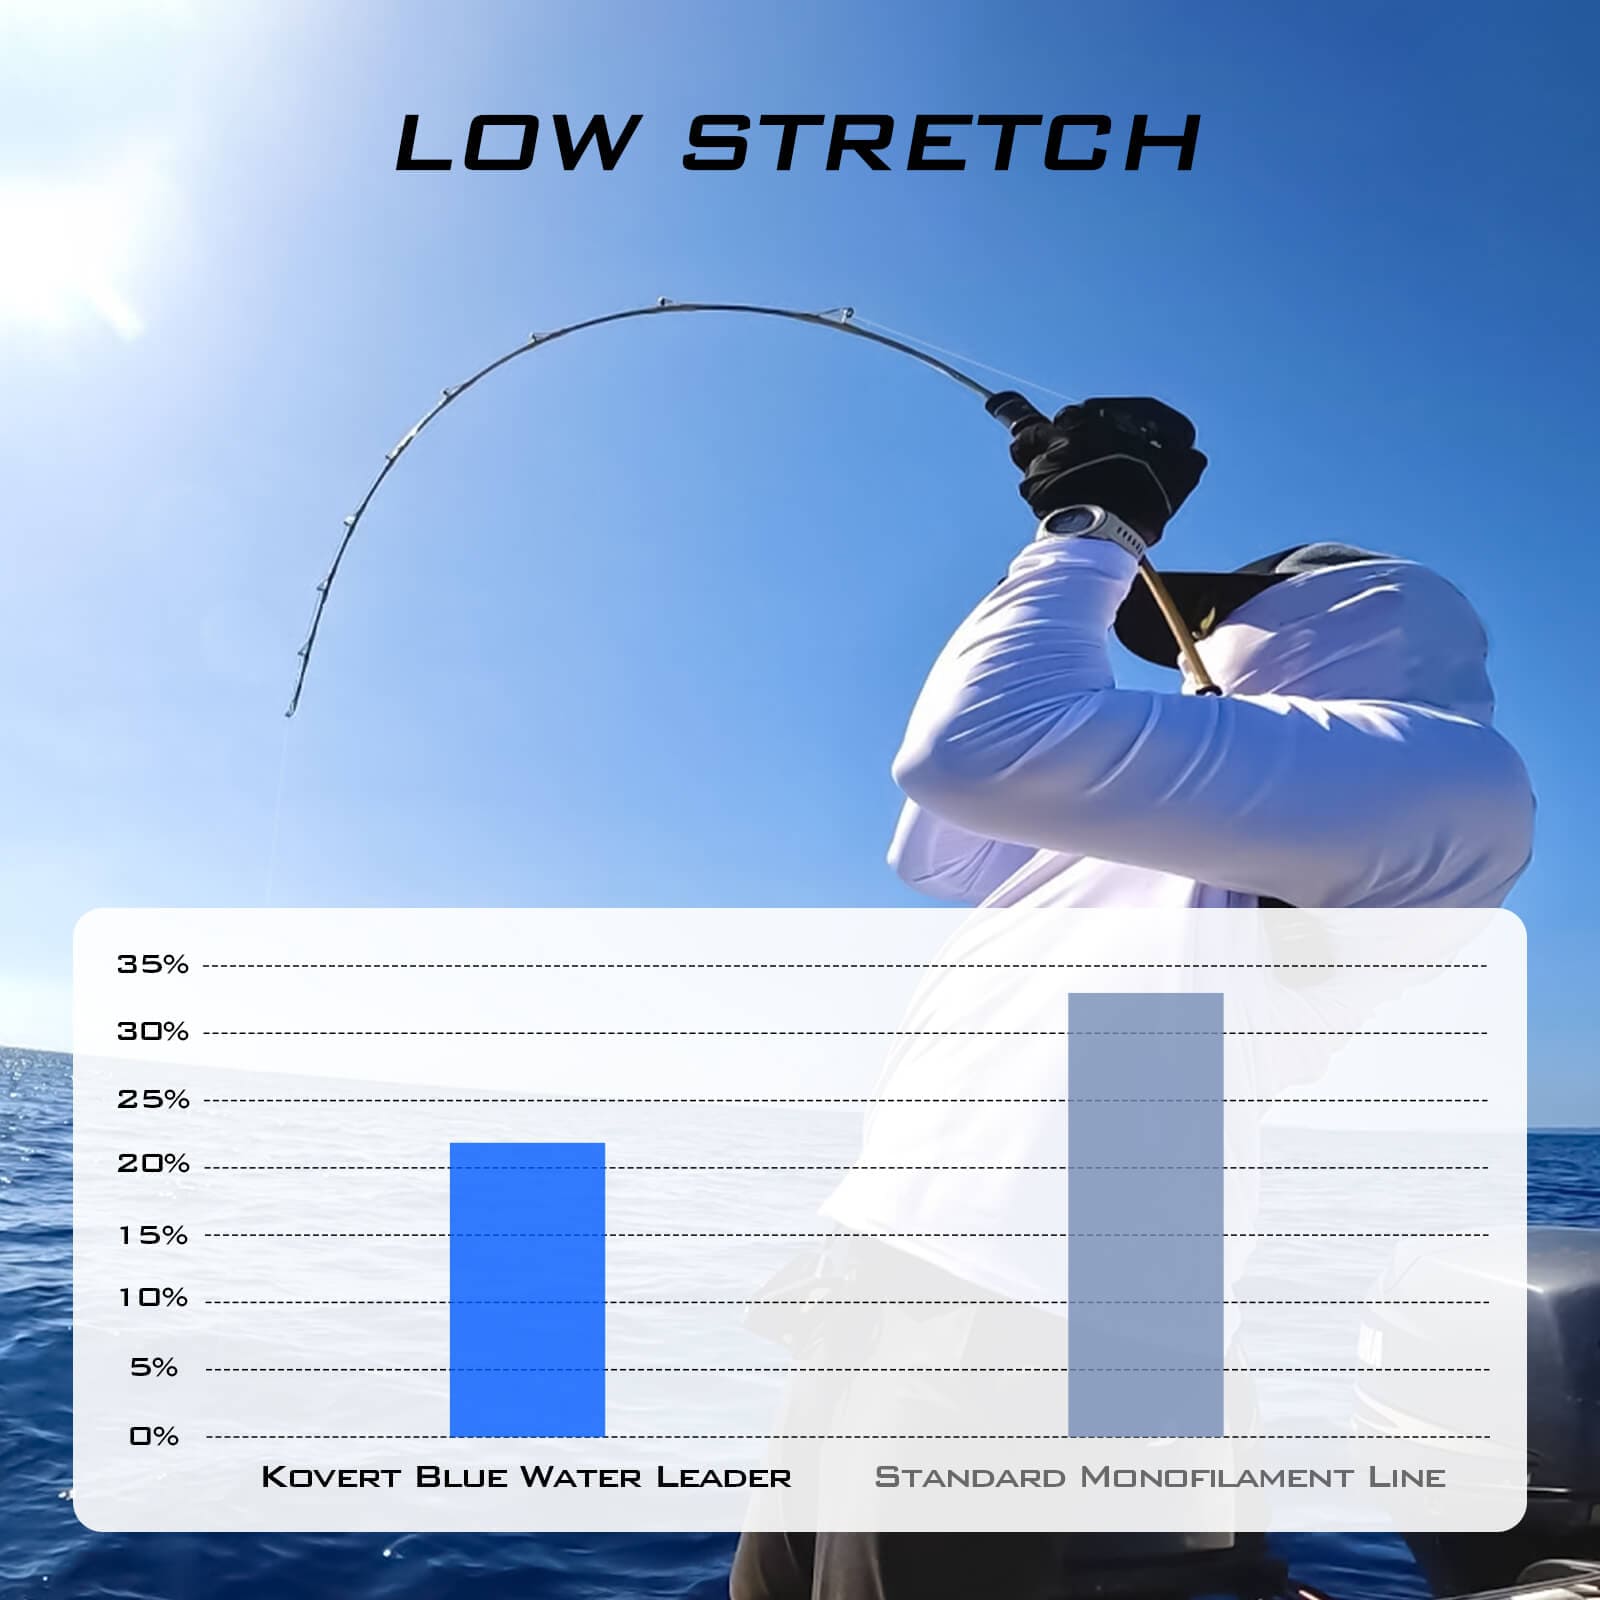 AIMTYD Kovert Fluorocarbon Fishing Line and Fluorocarbon Leader, Made in  Germany, Virtually Invisible Under Water, Shock Resistant, Increased  Sensitivity, Sinks Faster Than Mono, 100% Fluorocarbon 